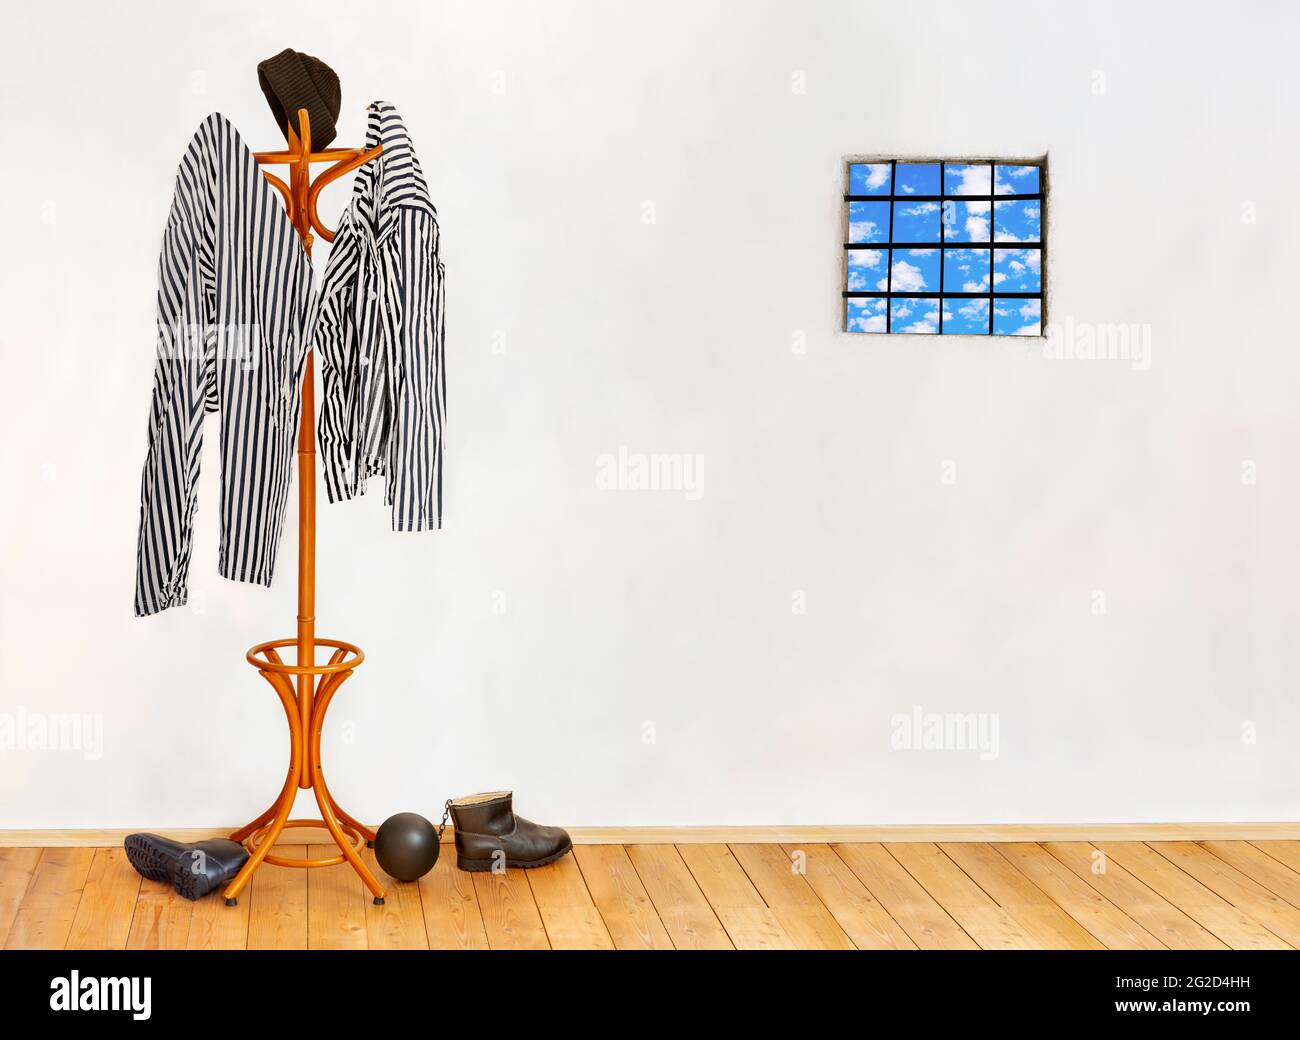 The striped prisoners costume hangs on the coat hook in an empty cell with windows with bars. Stock Photo